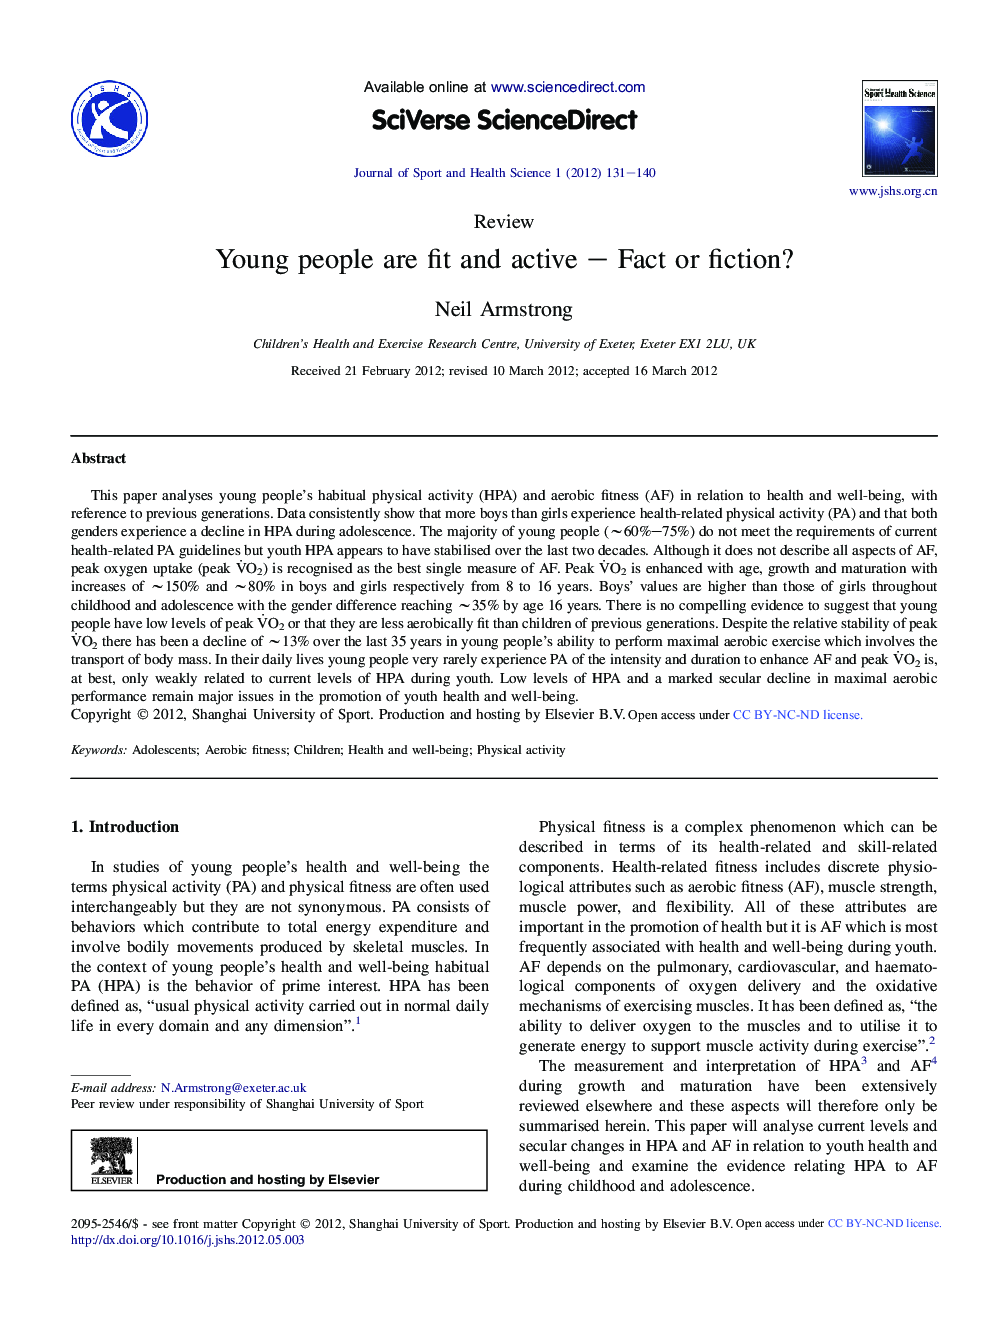 Young people are fit and active – Fact or fiction? 